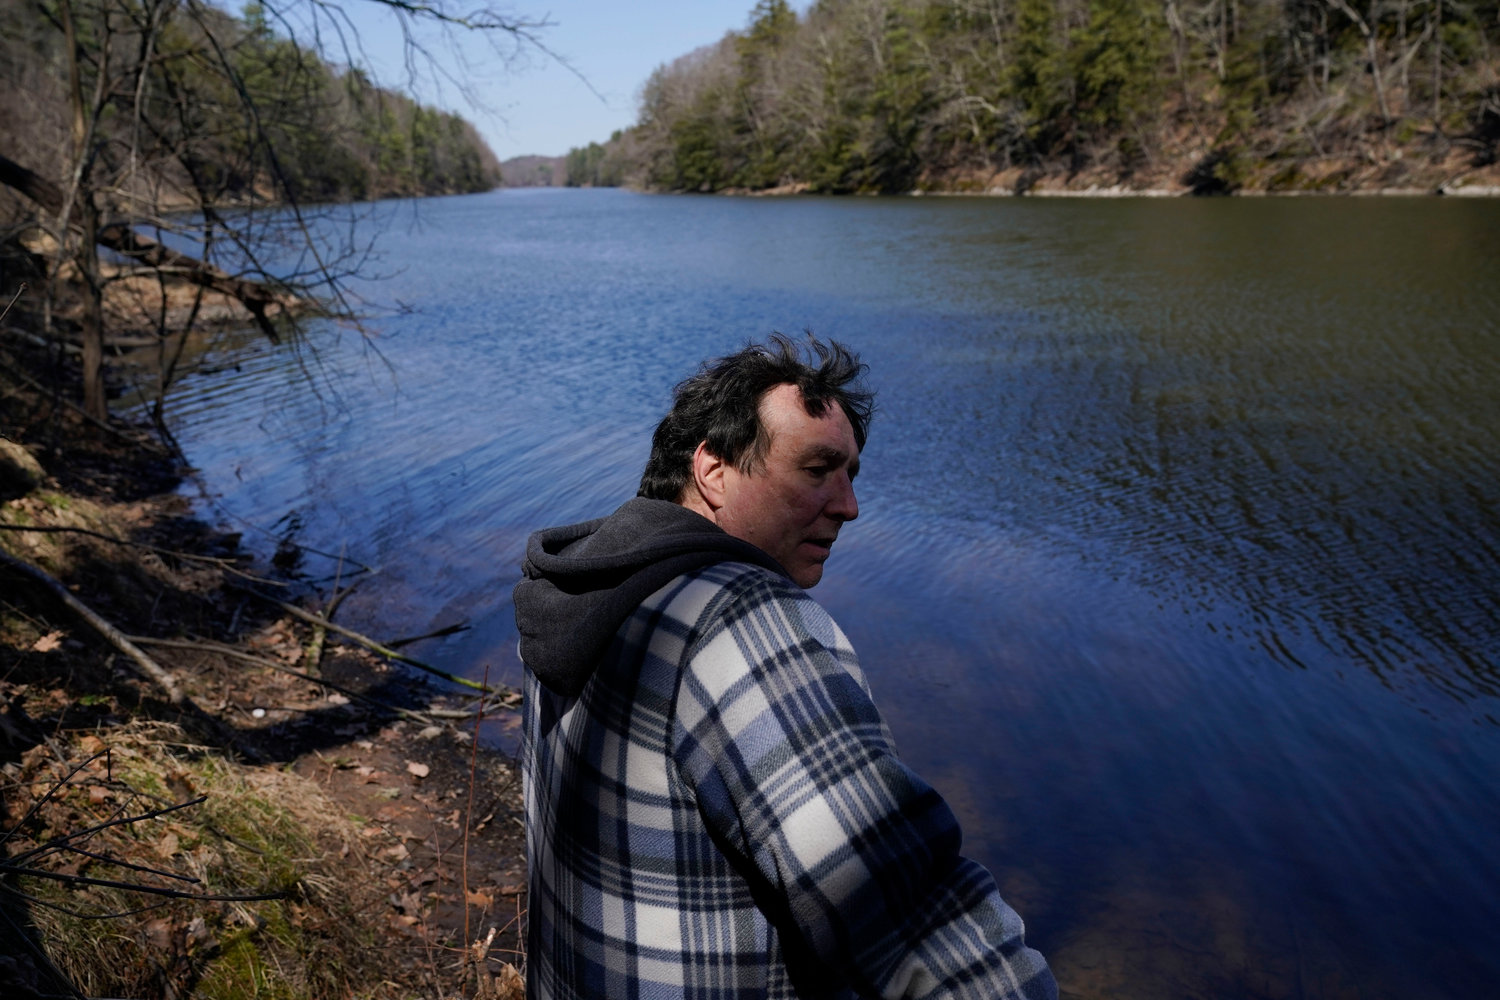 Michael Vallarella shows reporters a section of the Esopus Creek near his house in Saugerties, N.Y., Tuesday, April 5, 2022. As western regions contend with drier conditions, New York City is under fire for sometimes releasing hundreds of millions of gallons of water a day from the Ashokan reservoir in the Catskill Mountains. The occasional releases, often around storms, have been used to manage water the reservoir's  levels and to keep the water clear. But residents downstream say the periodic surges cause ecological harm along the lower Esopus Creek.  (AP Photo/Seth Wenig)